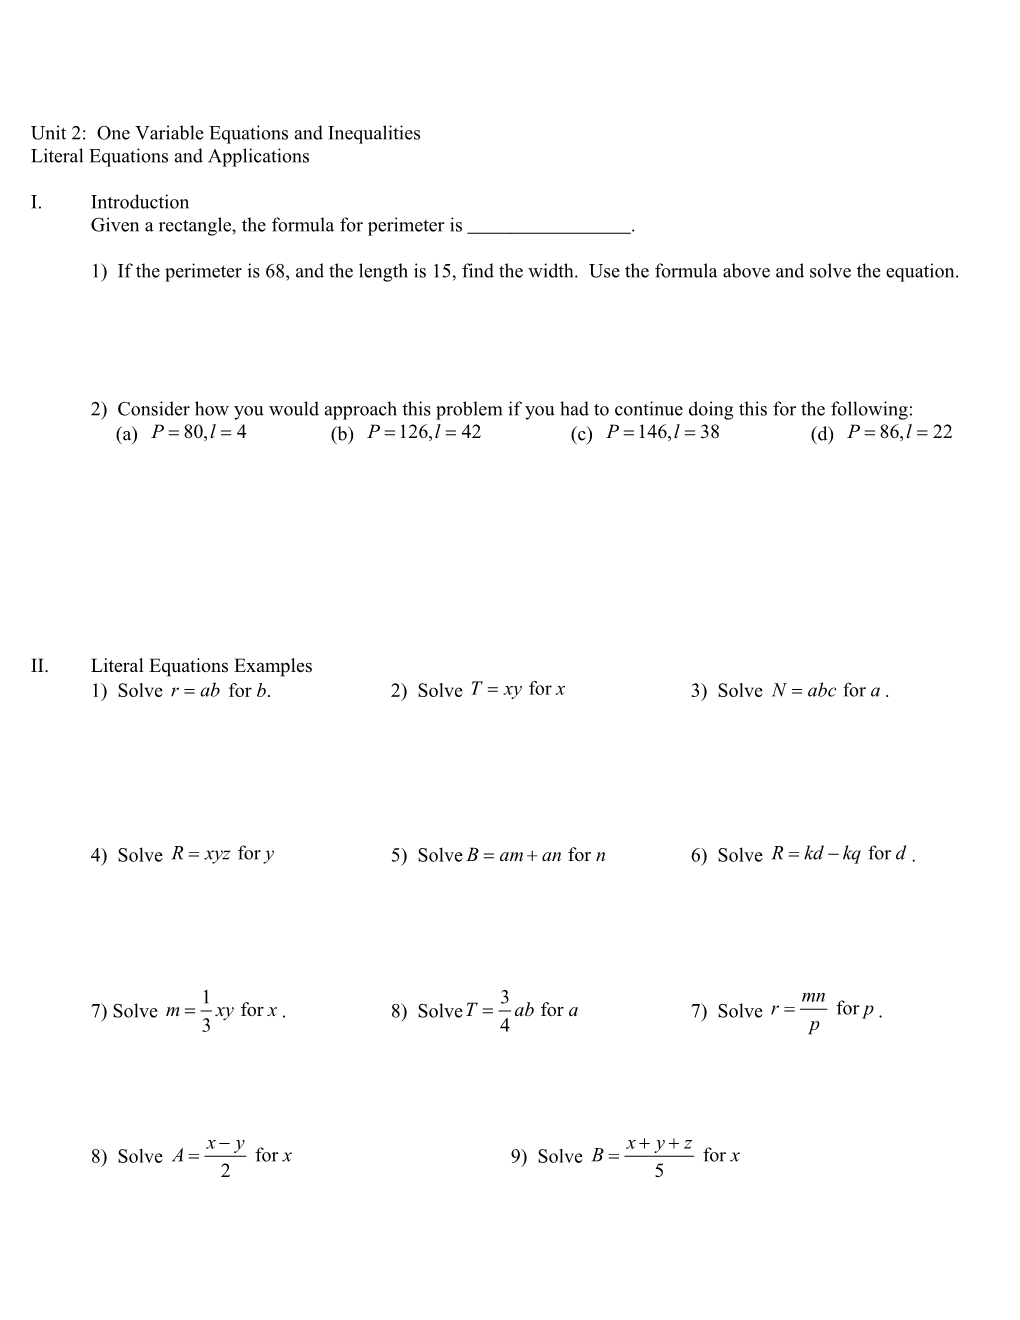 Unit 2: One Variable Equations and Inequalities